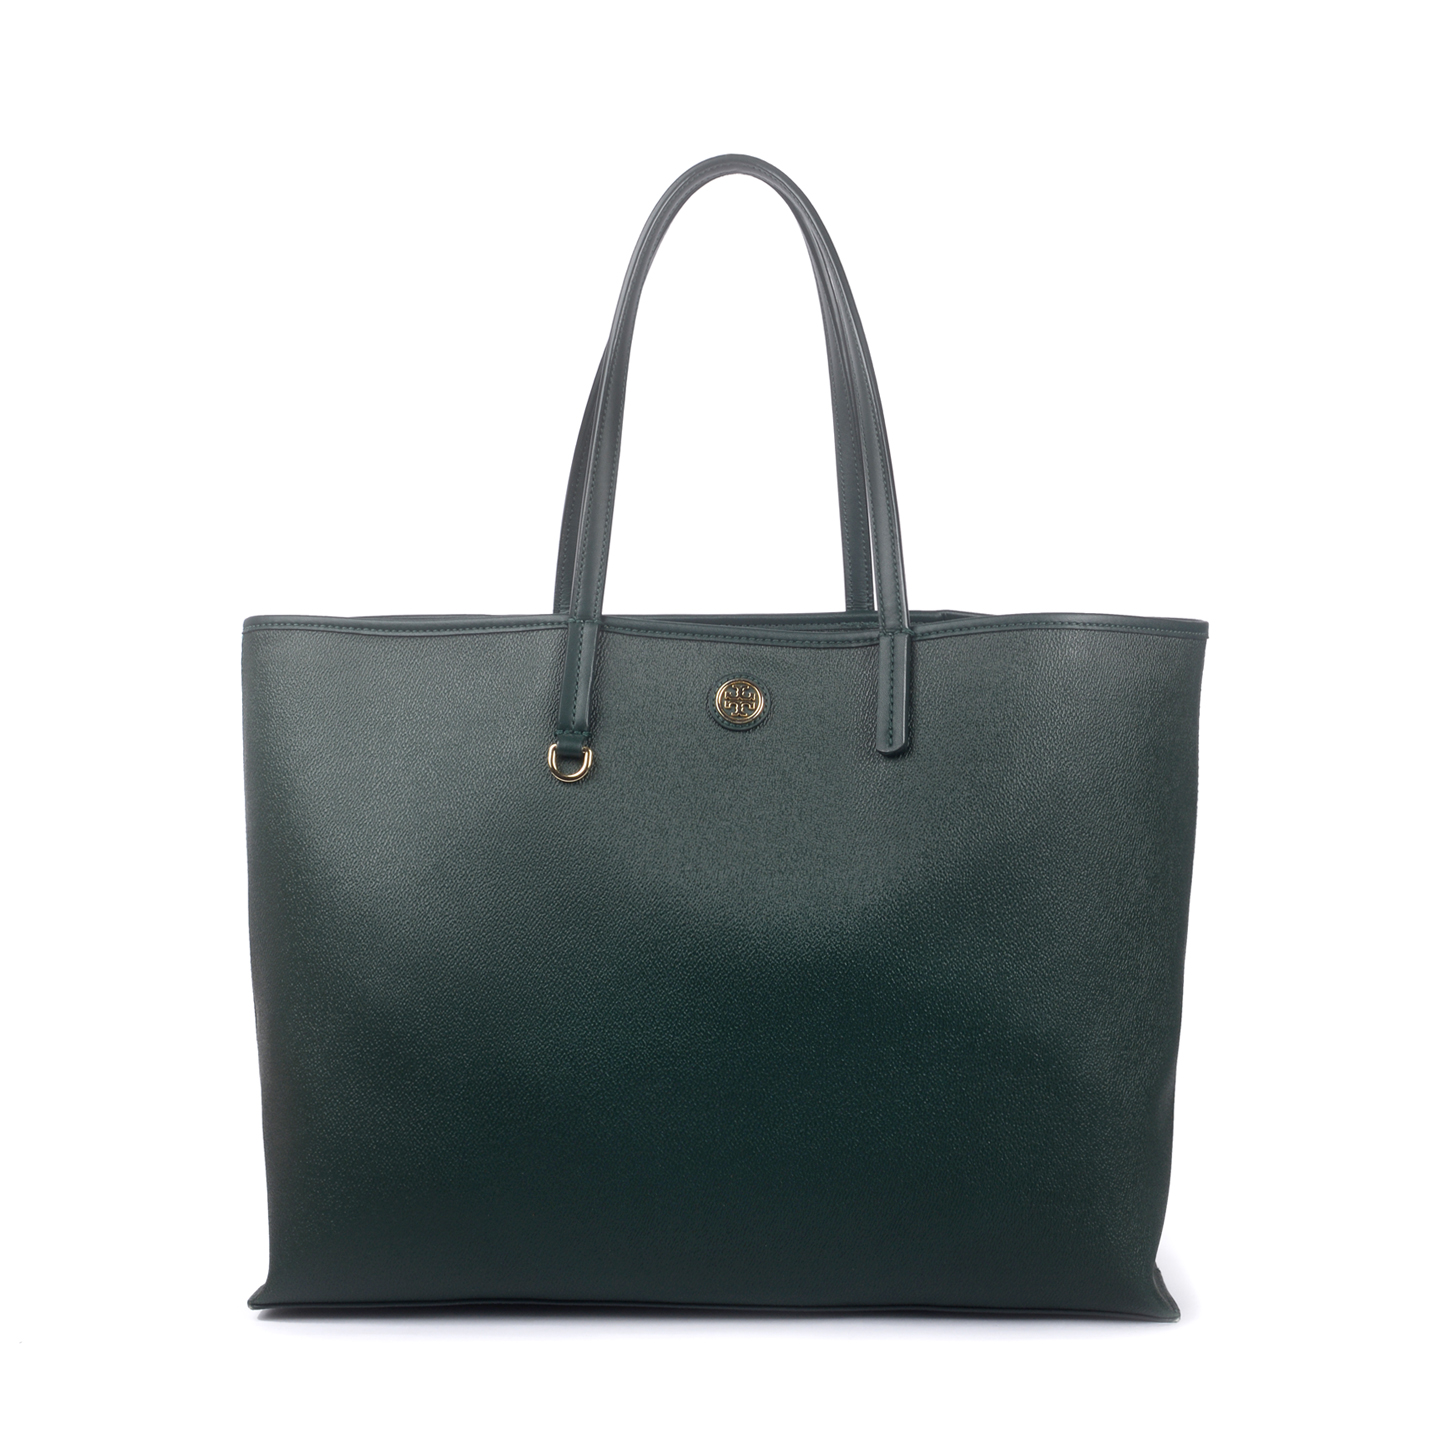 Tory Burch Bottle Green Cameron Tote Bag - LabelCentric